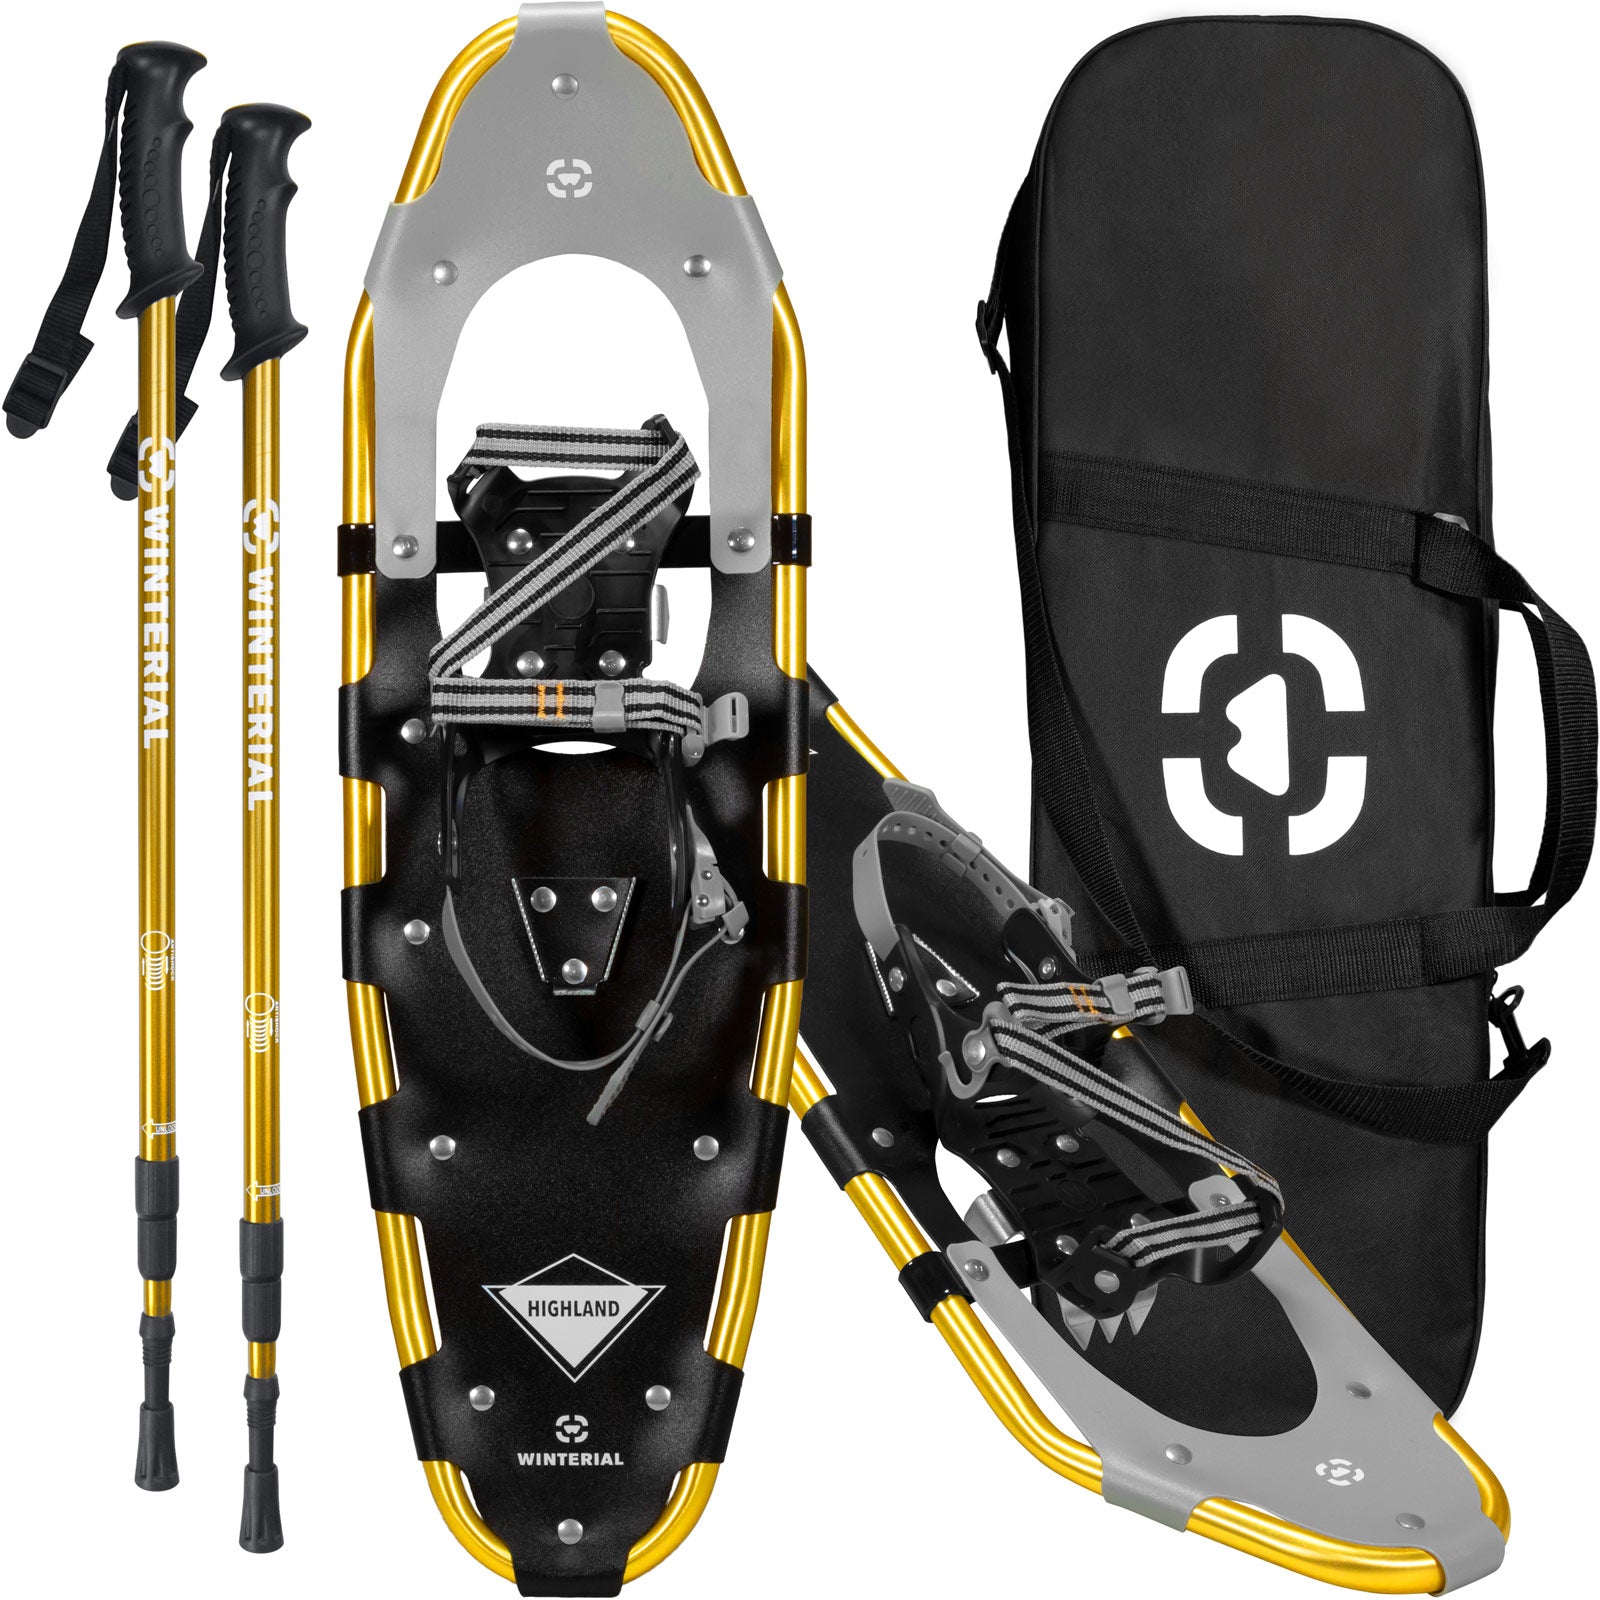 Winterial Highland 30-Inch Snowshoes, Gold, for Rolling Terrain, Includes Poles and Carry Bag